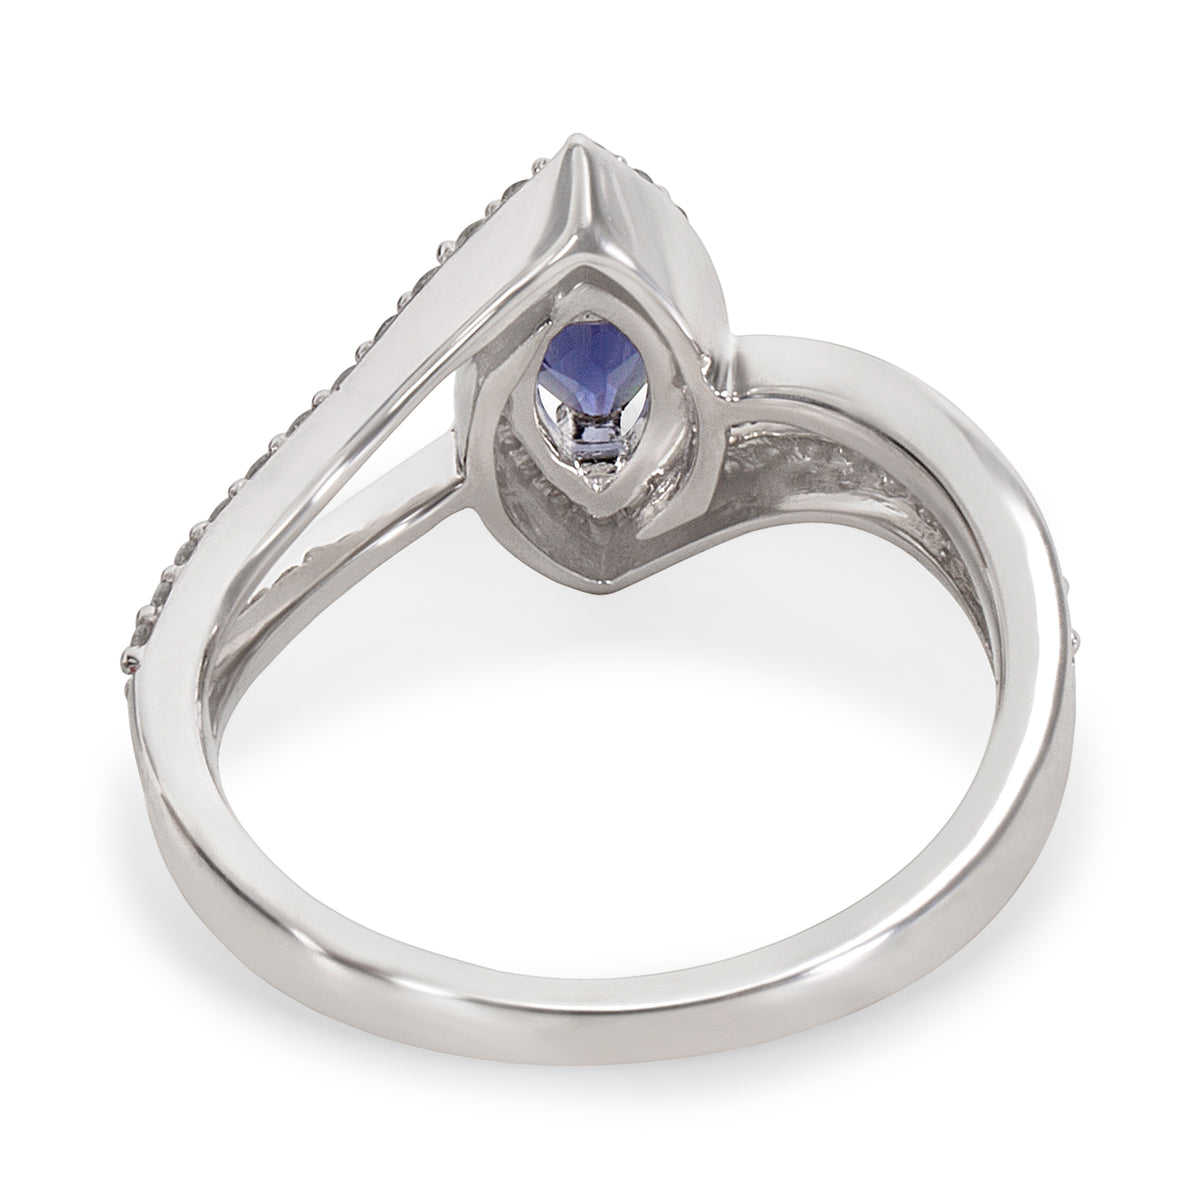 BRAND NEW Diamond & Iolite Marquise Ring in 14k White Gold (0.48 CTW)